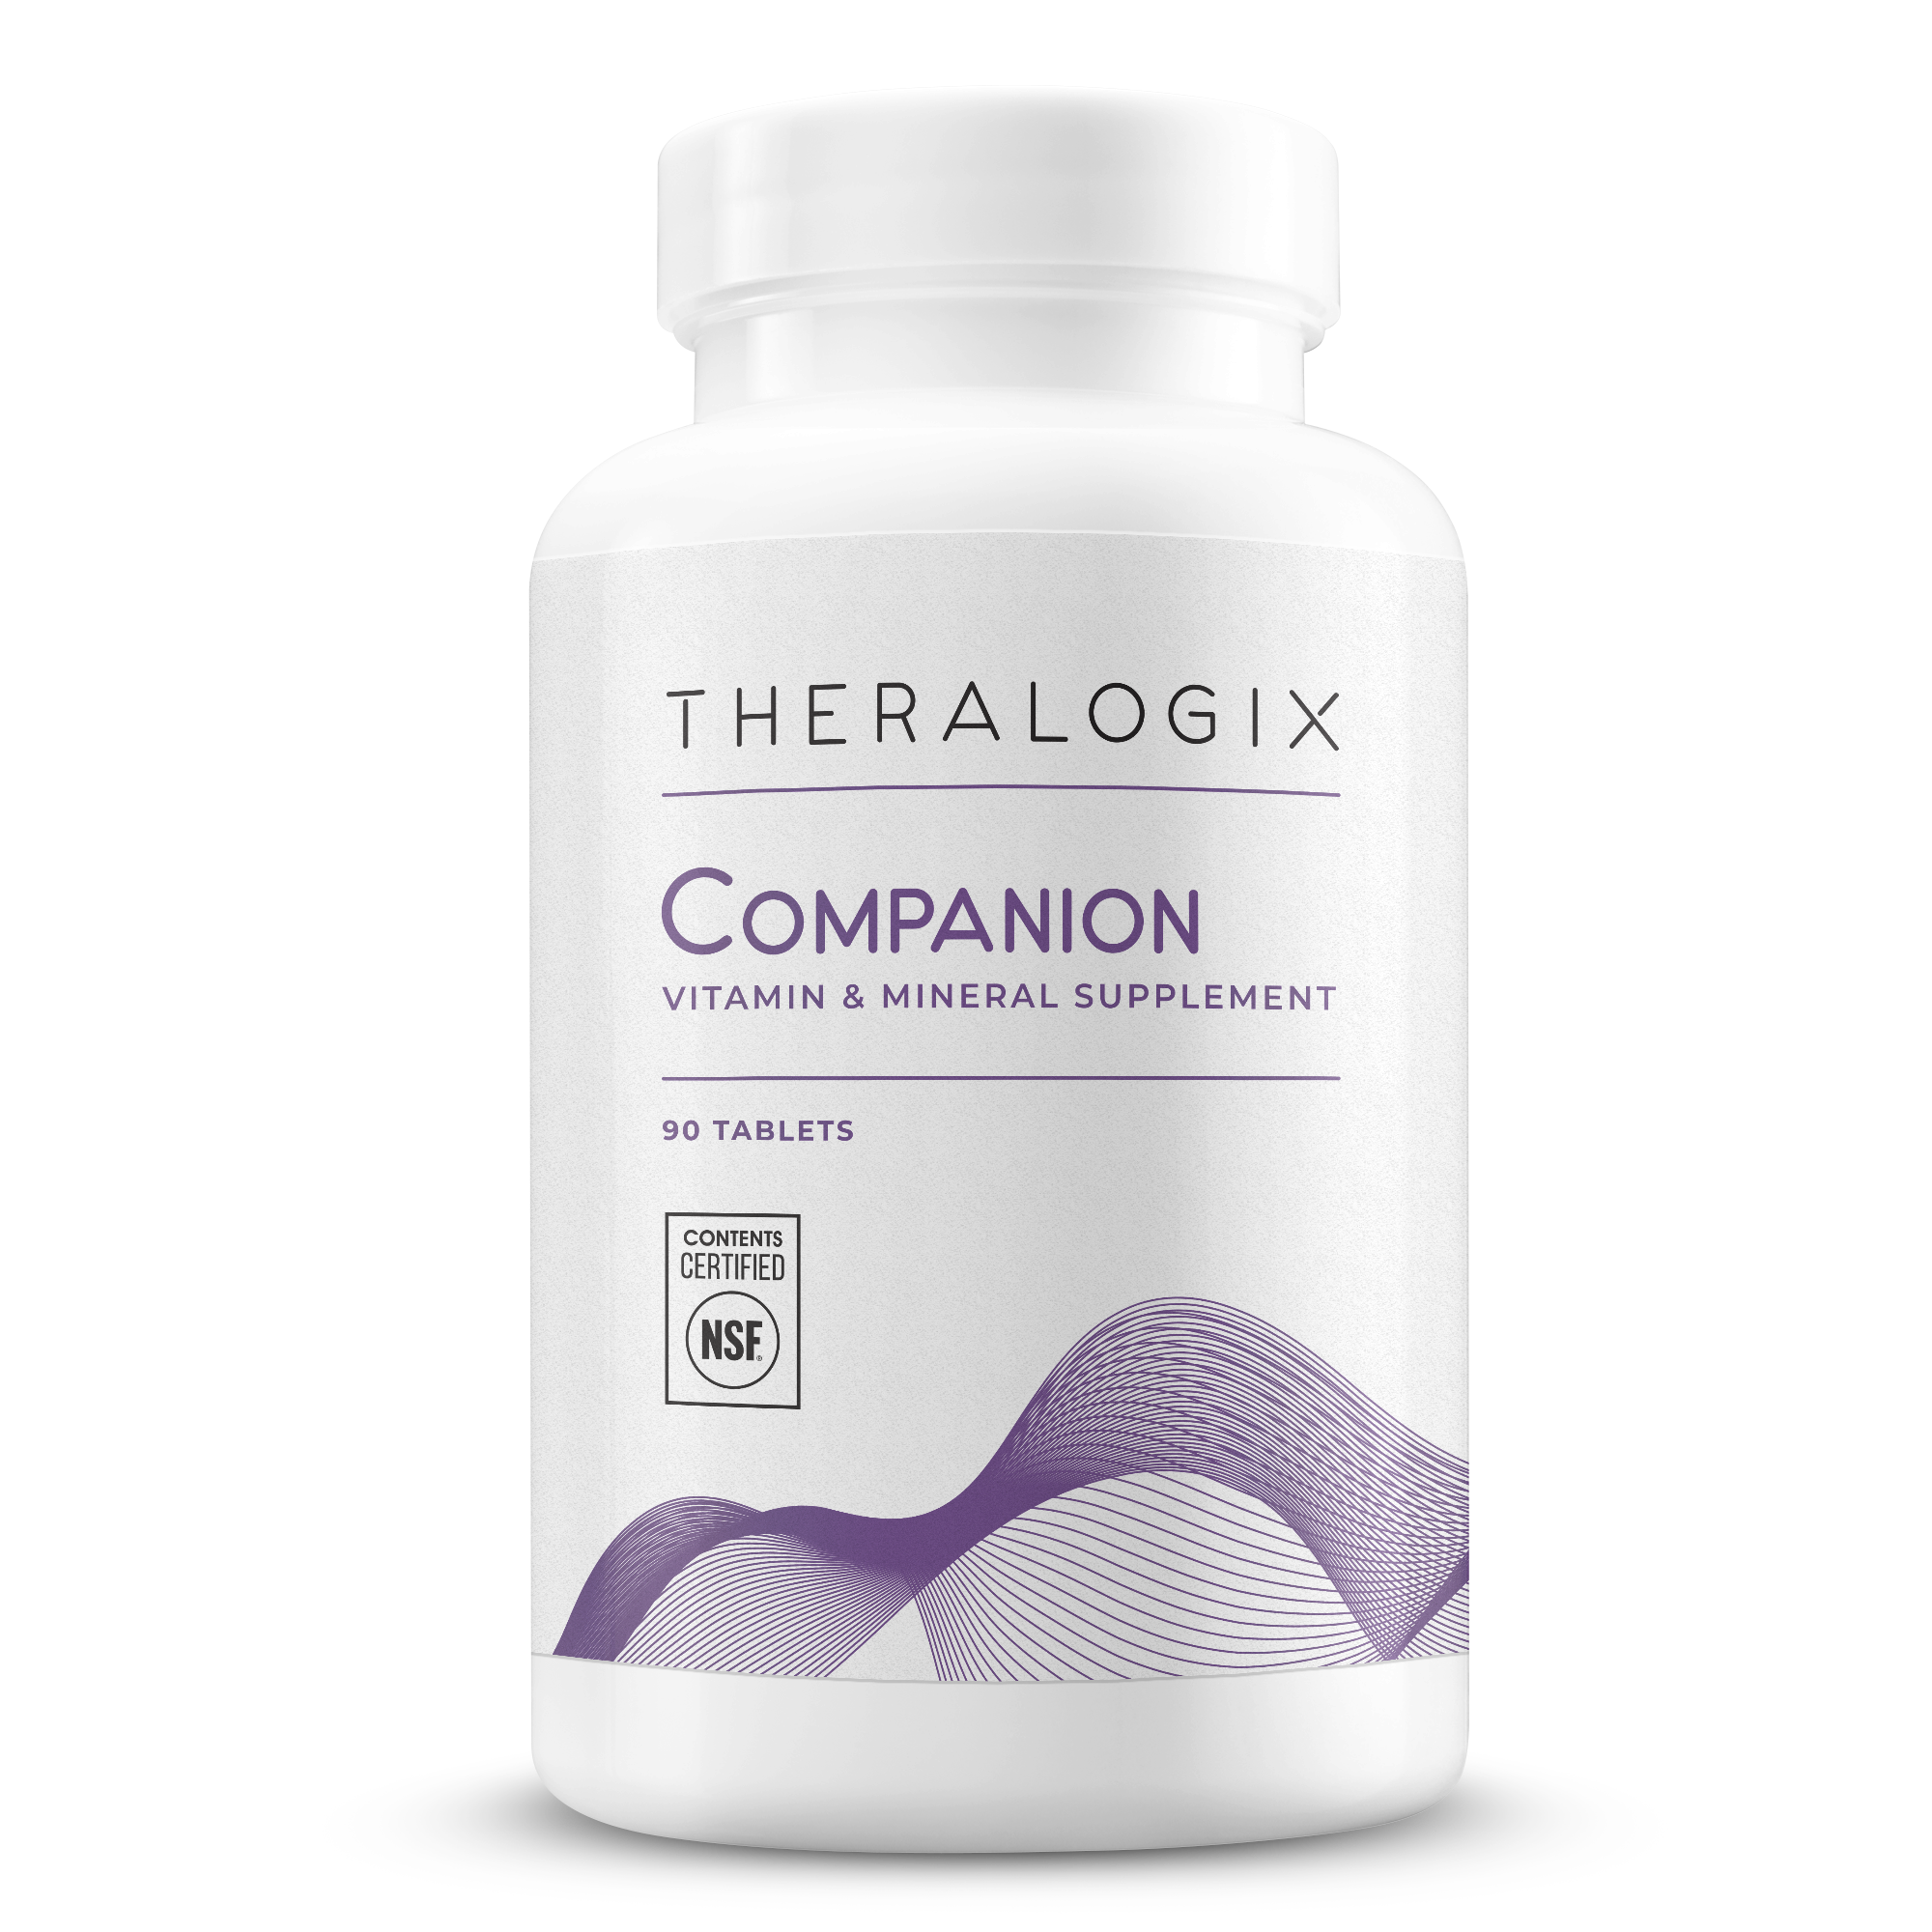 Companion is a multivitamin formulated without vitamin D, vitamin K, or iron.